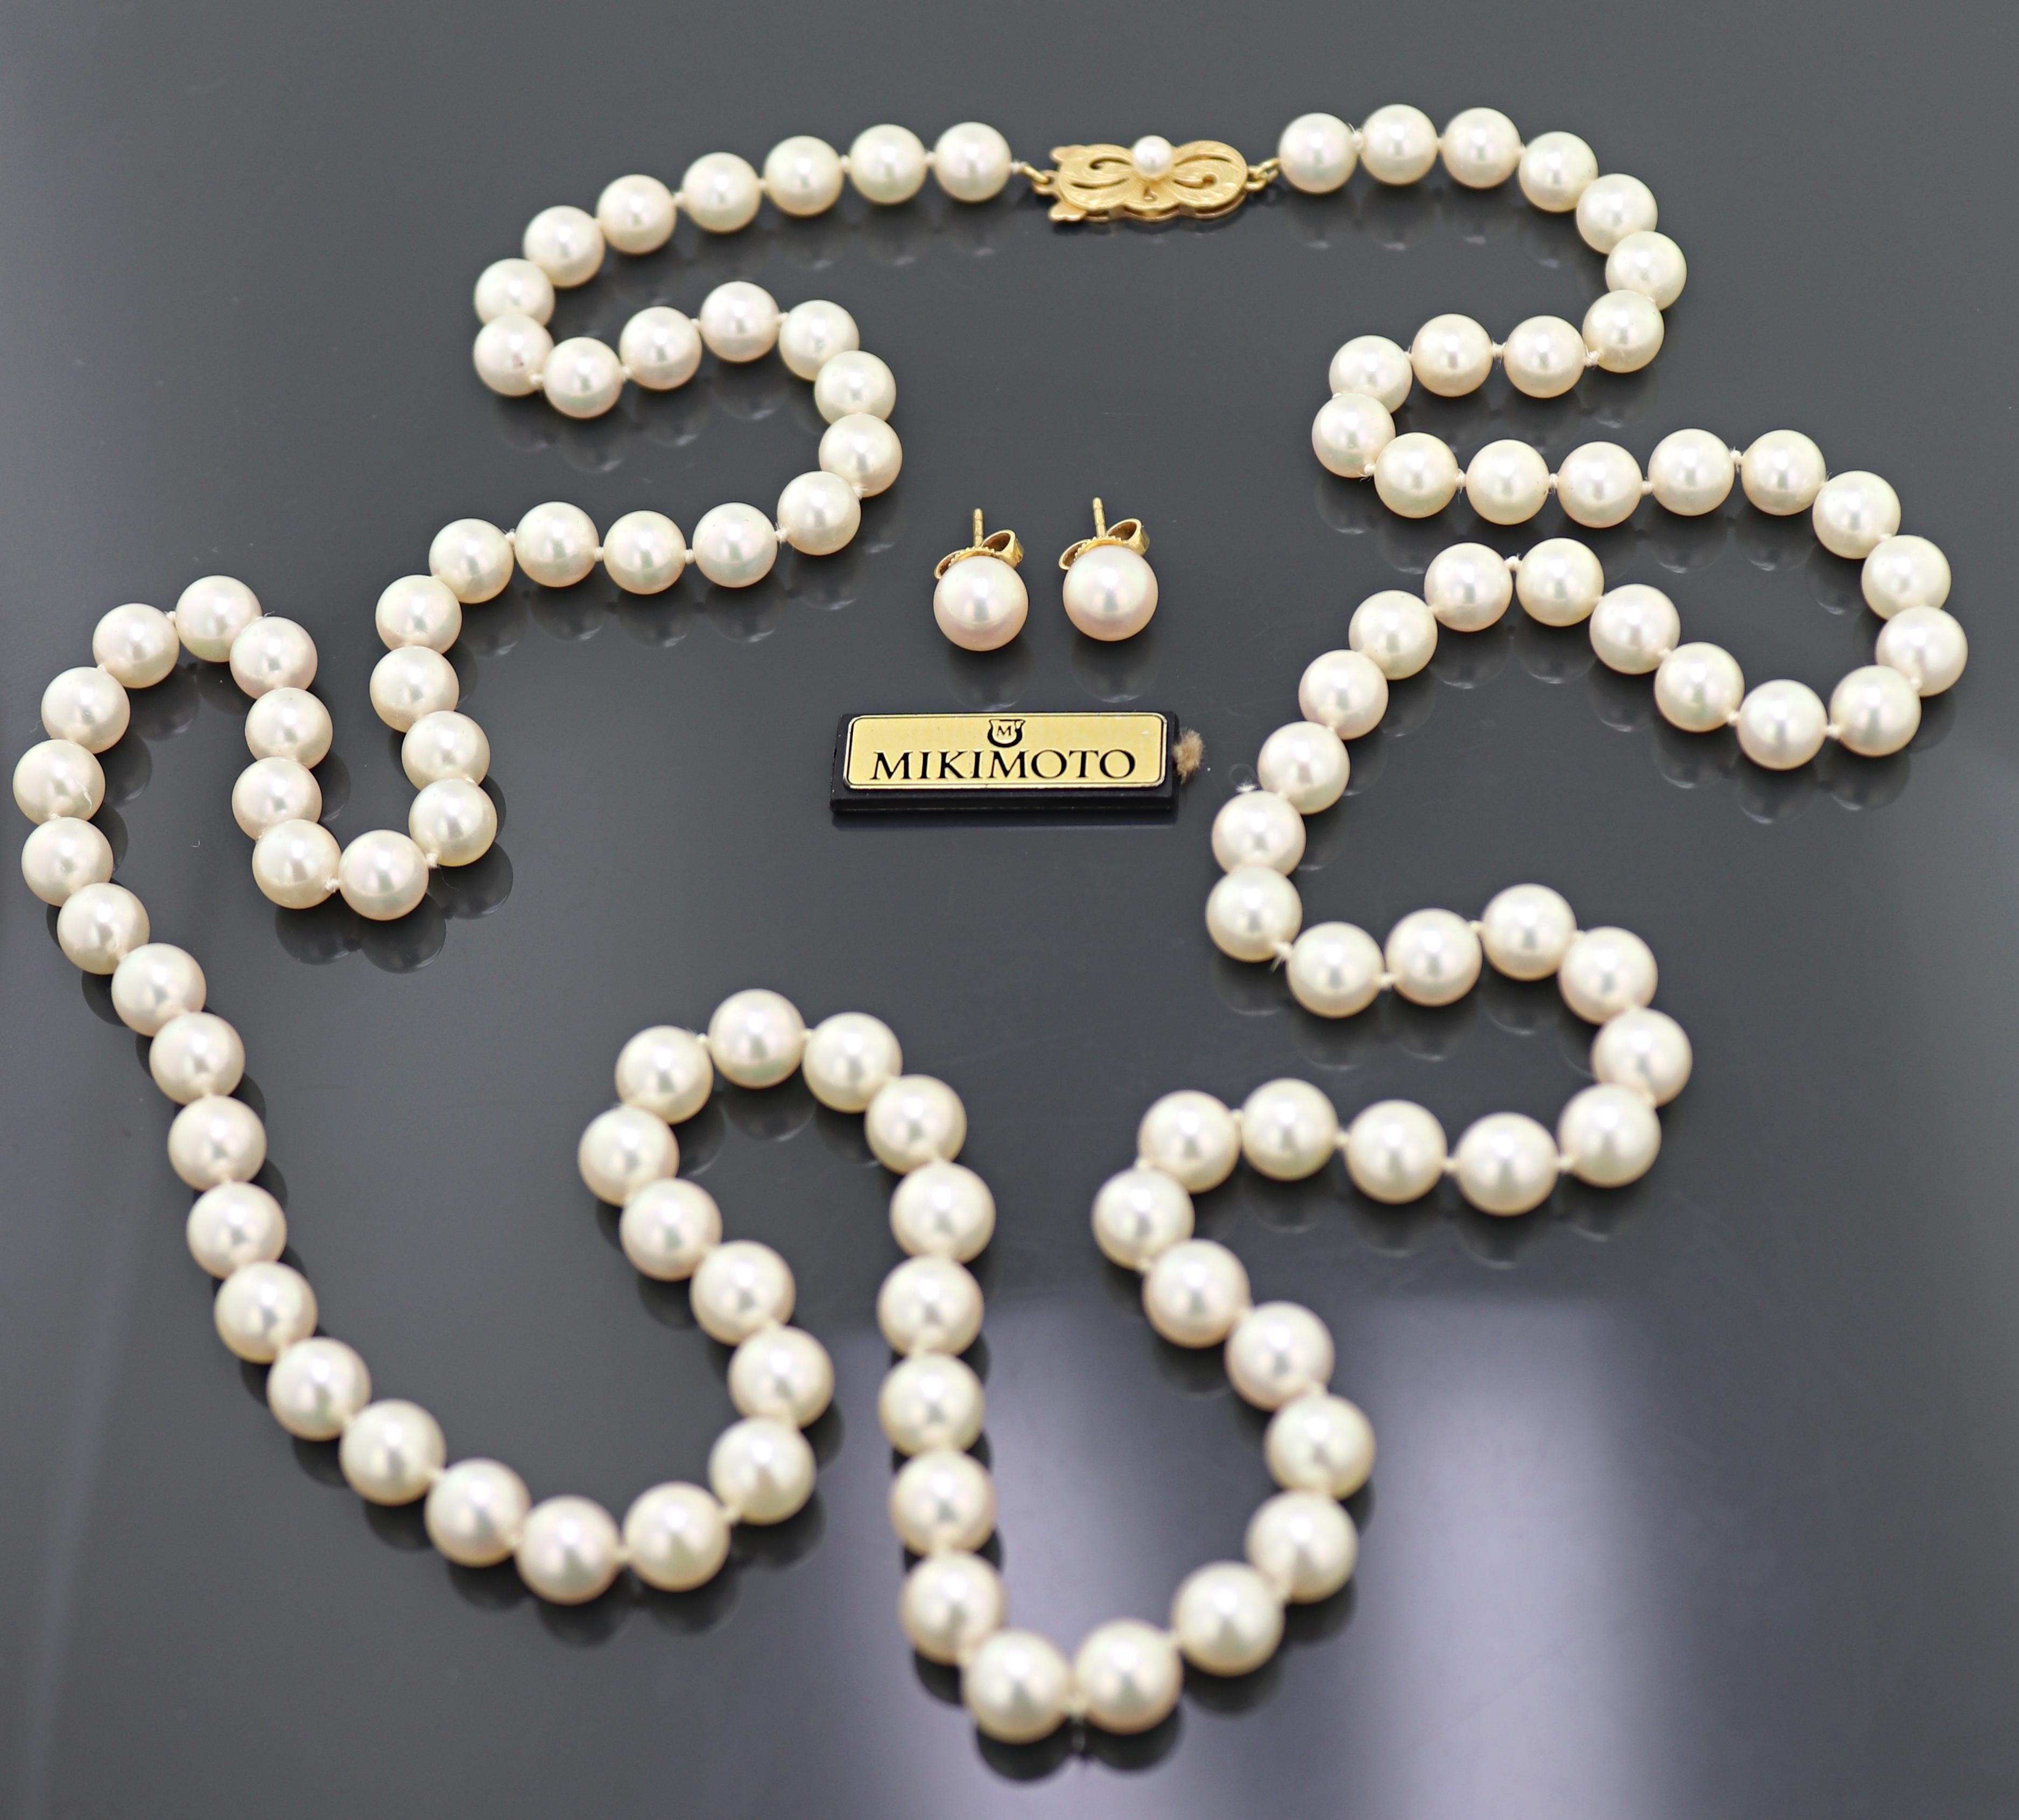 Composed of  106,  7 to 6.5 mm Akoya cultured pearls, completed by a 3.4
mm cultured pearl, 18k yellow gold Mikimoto clasp, forming a 30 inch
necklace; together with a pair of Mikimoto 7.0 mm 18k yellow gold stud
earrings, Gross Weight 49.61 grams.